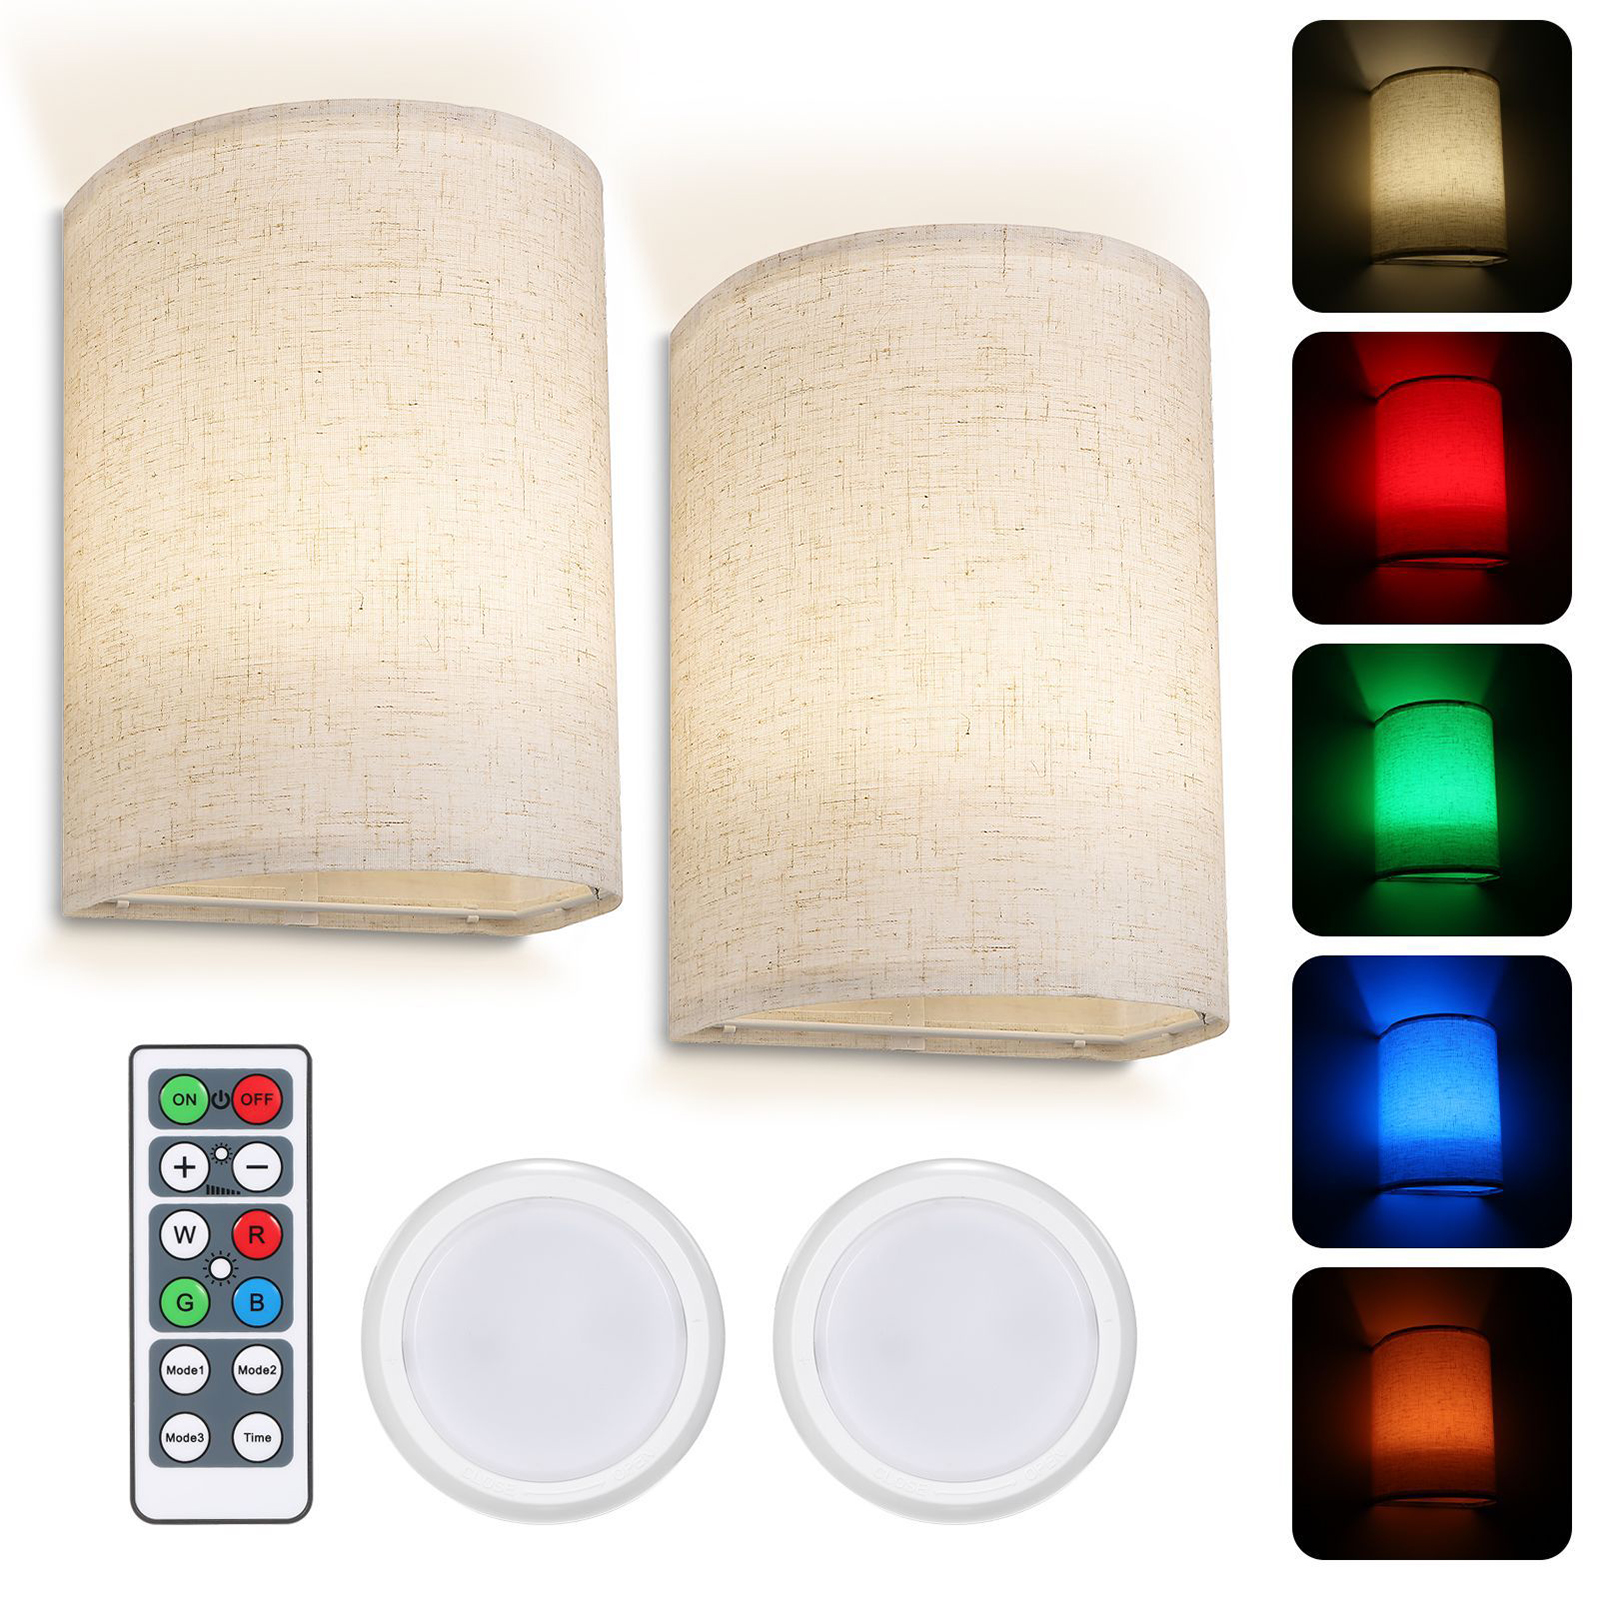 2pcs Led Wall Lamp With Remote Control 3 Color Temperature Rechargeable Wireless Design Bedroom Bedside Lamp For Bedrooms Living Rooms